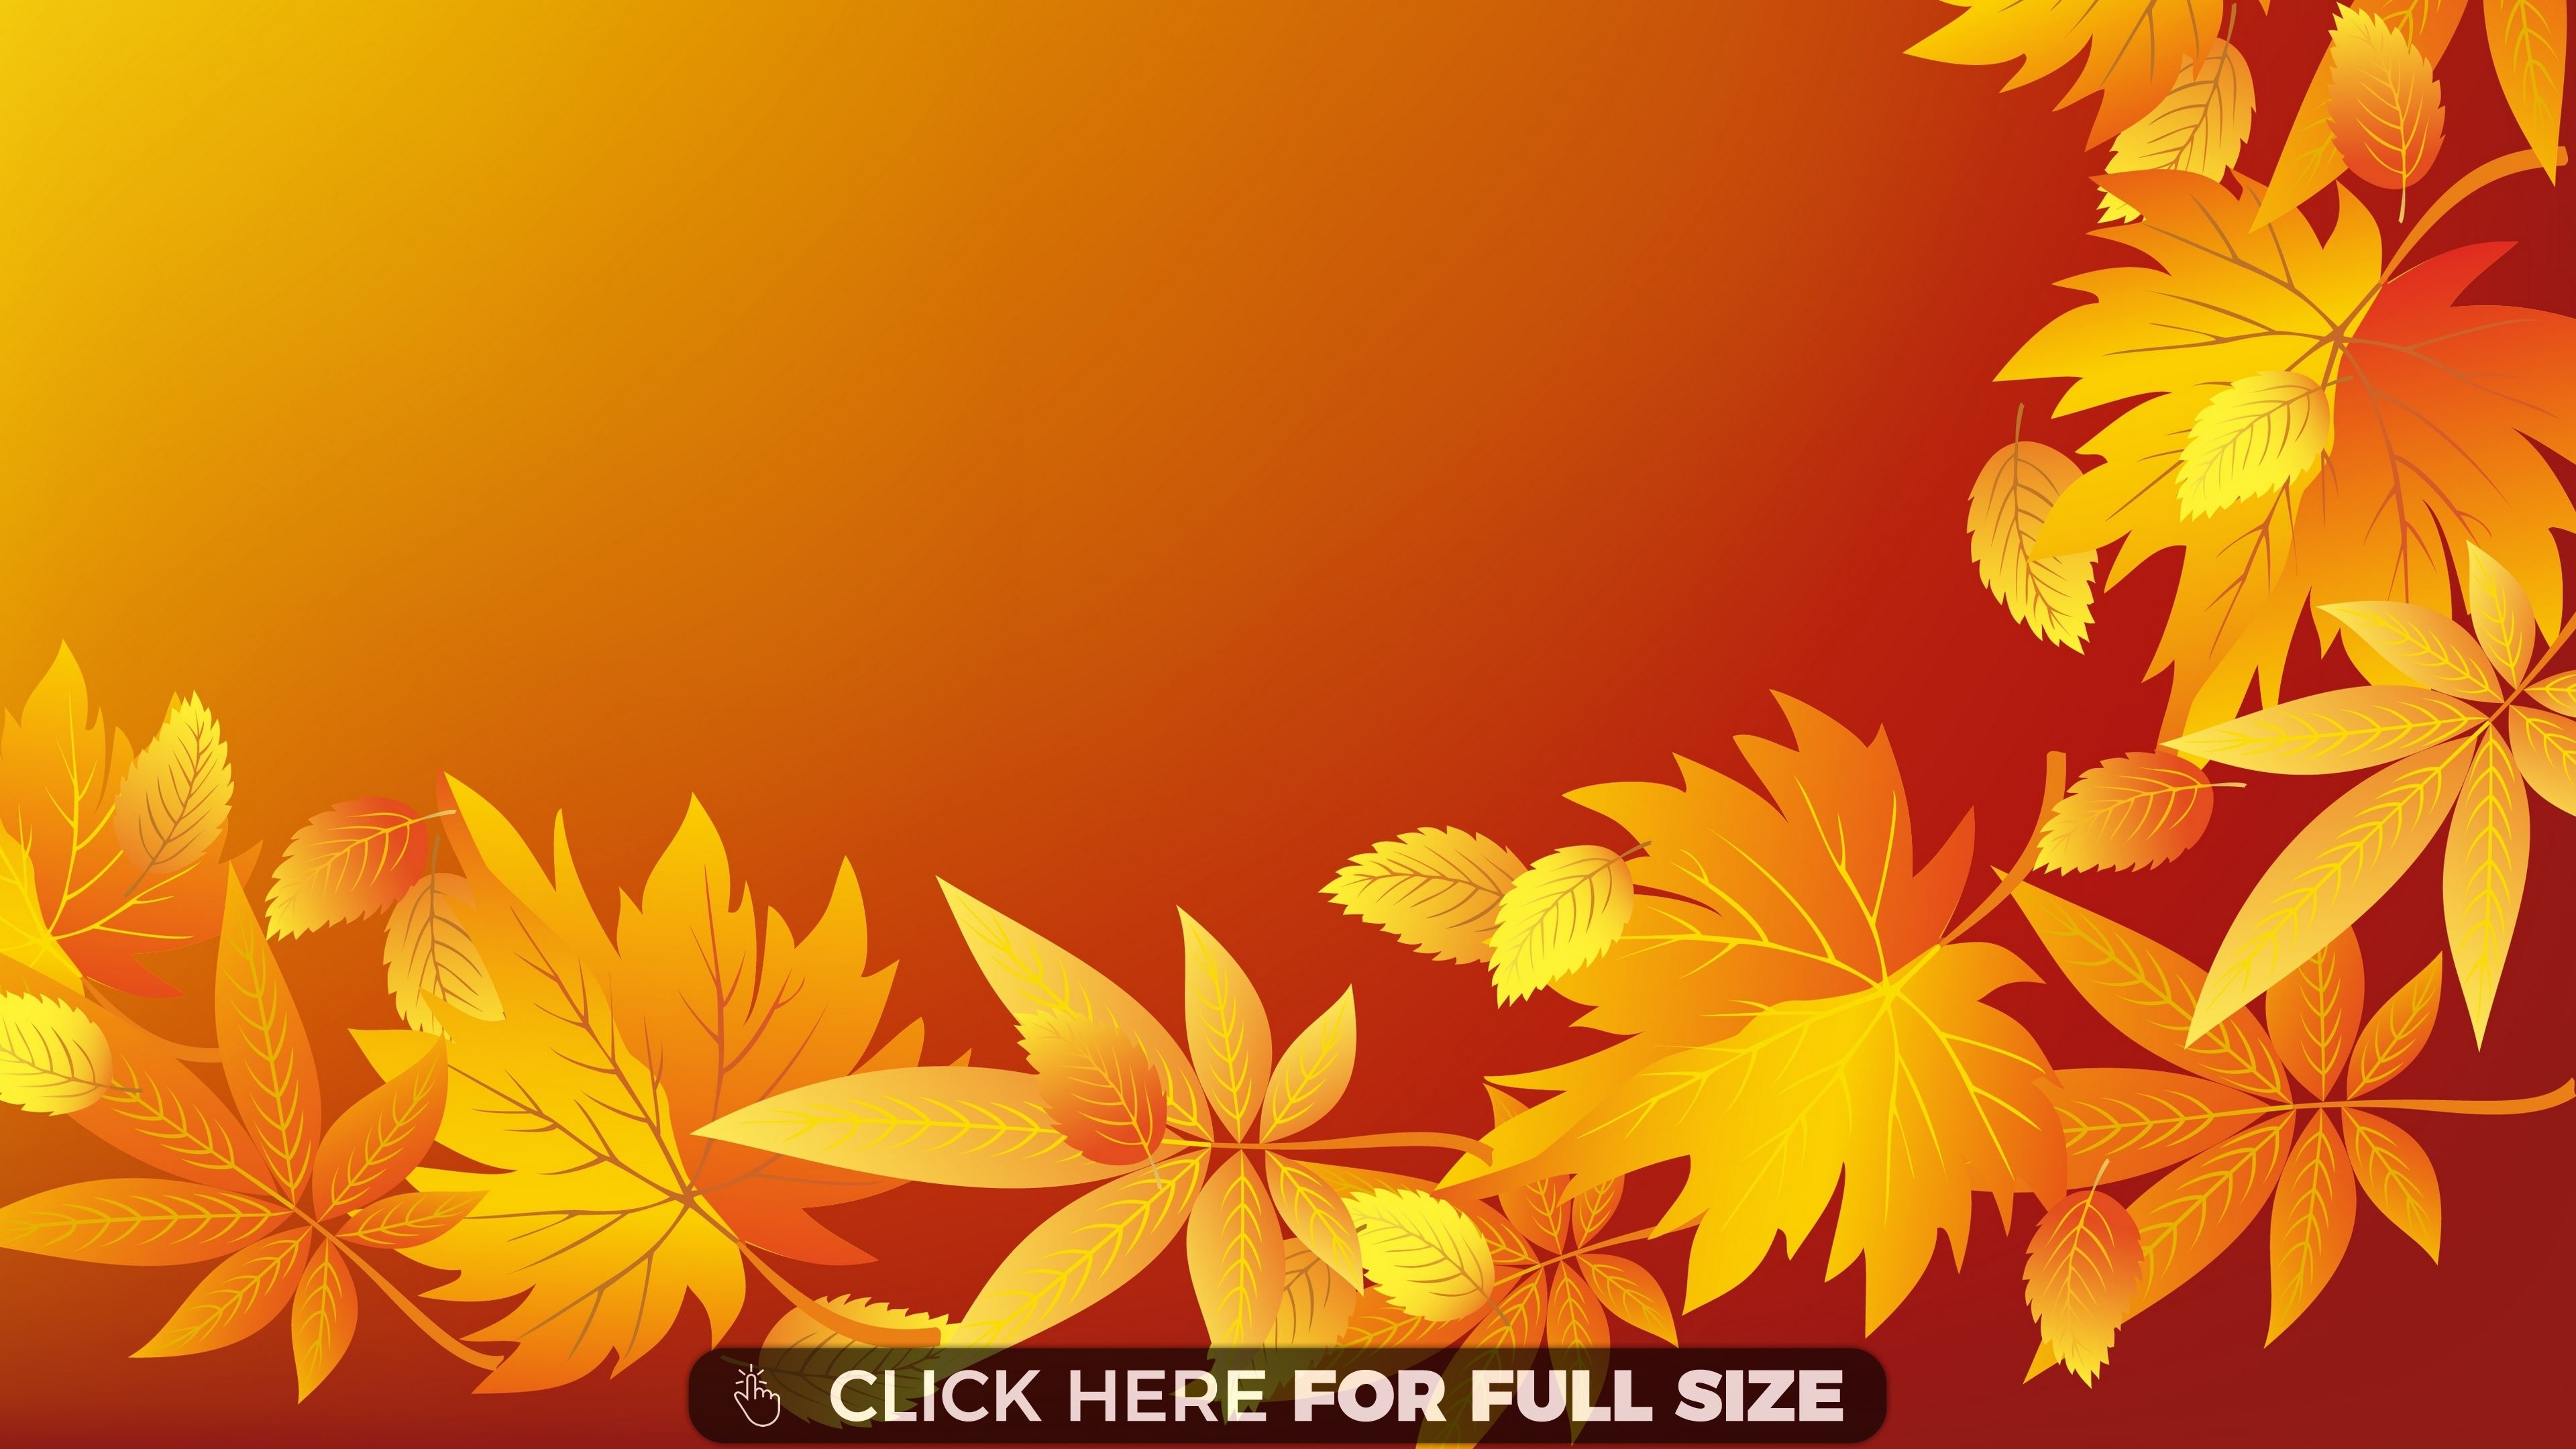 Autumn Leaves Background Related Keywords amp Suggestions